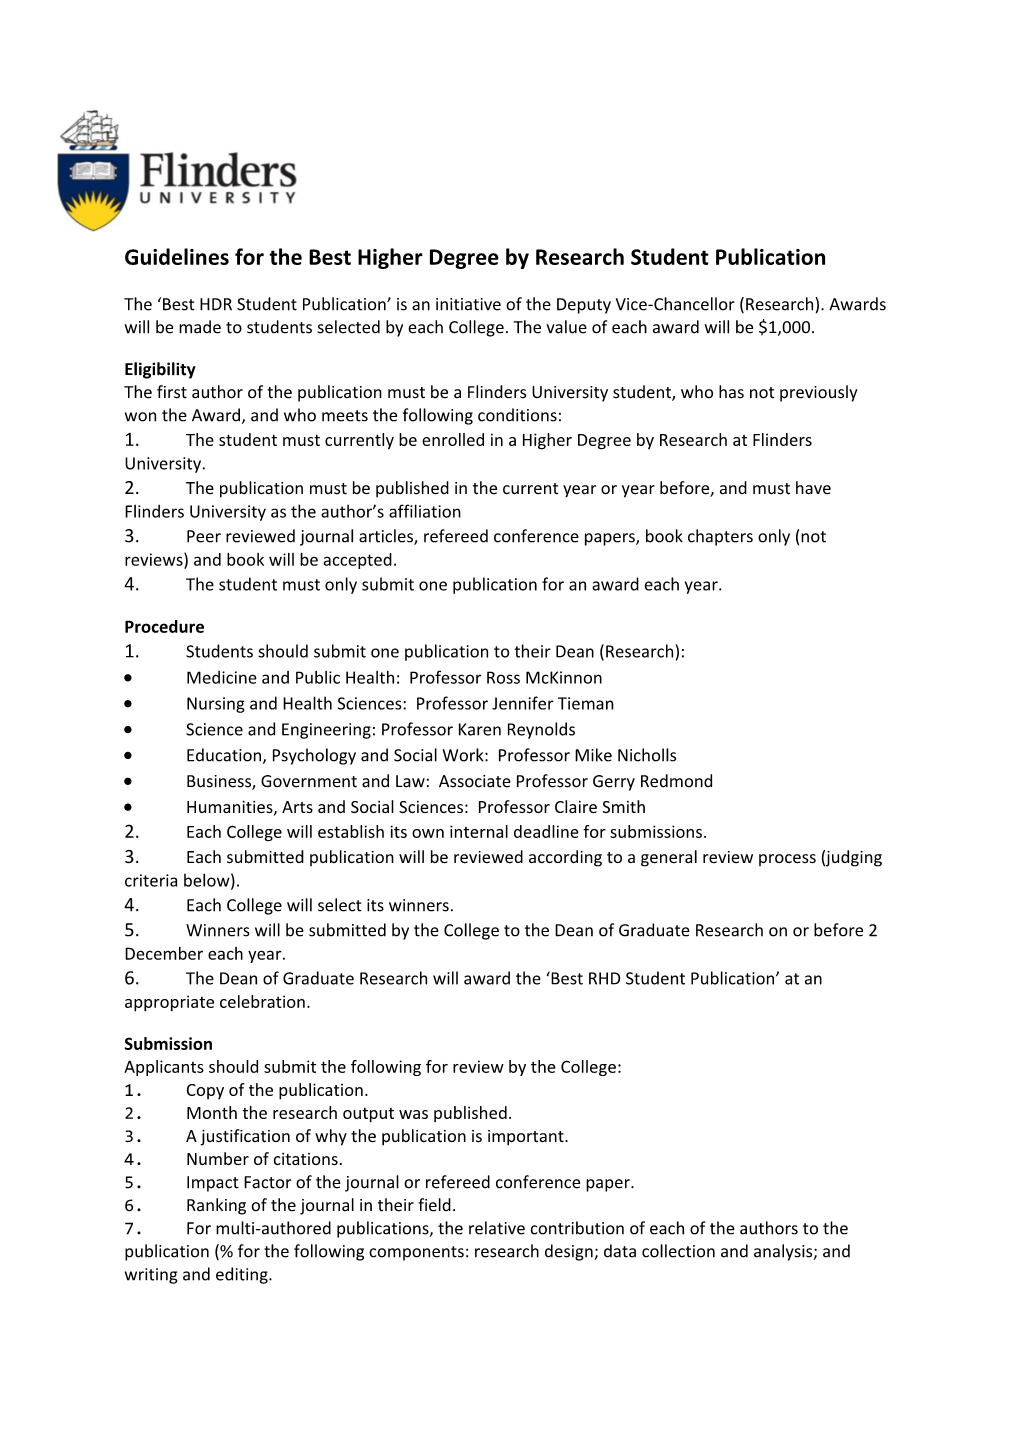 Guidelines for the Best Higher Degree Byresearch Studentpublication